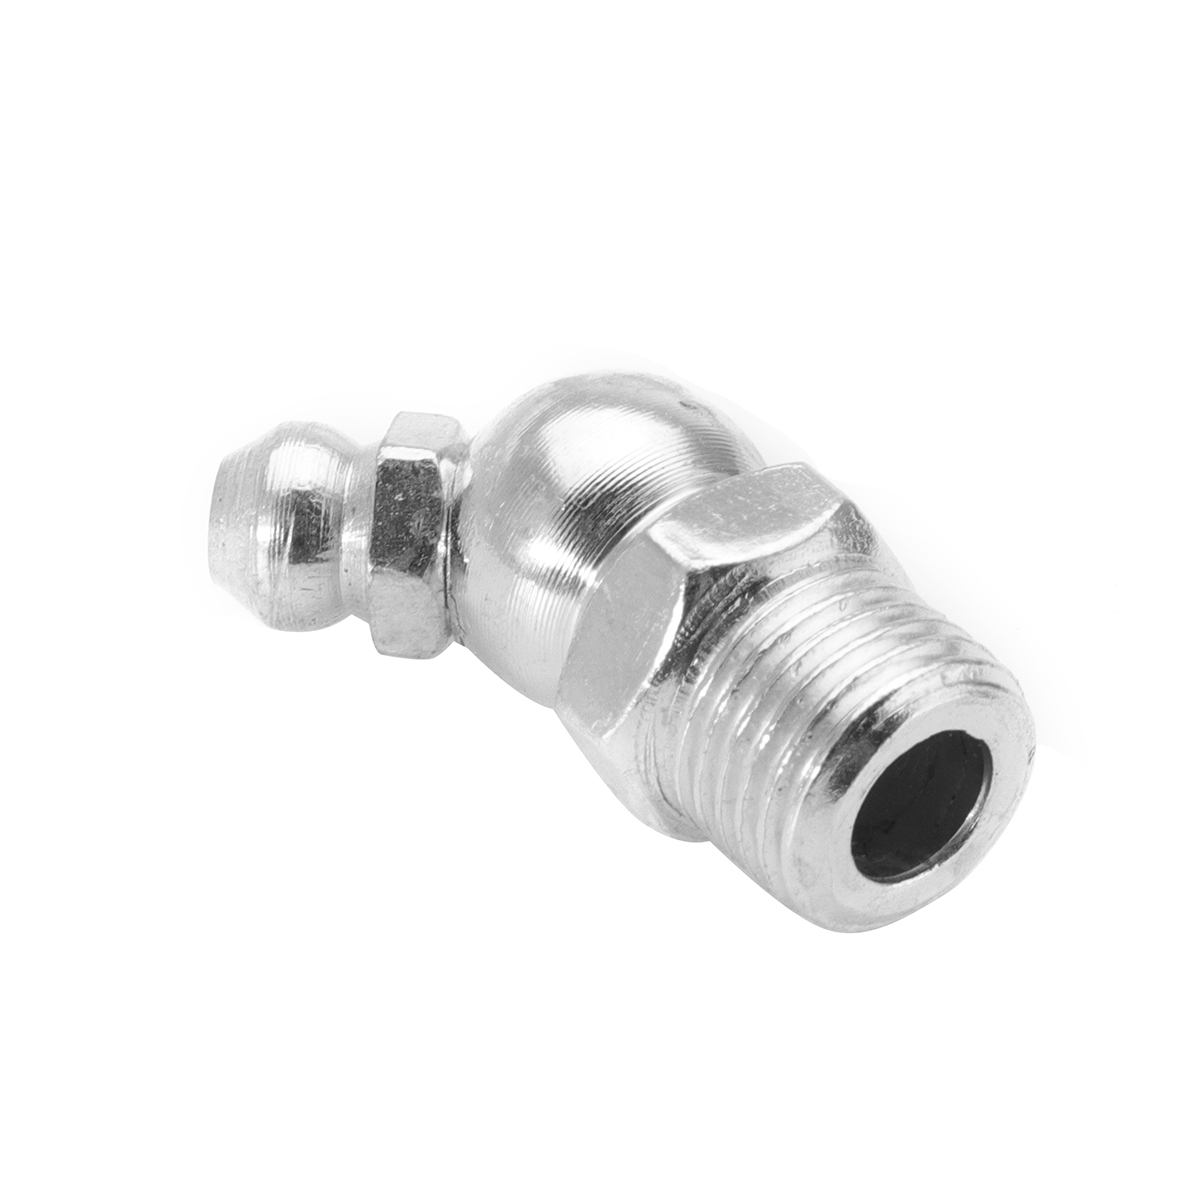 130pcs-Metric-Imperial-Fitting-BSP-UNF-M6-M8-M10-Assorted-Hydraulic-Grease-Nipples-Pipes-Fittings-1436097-5